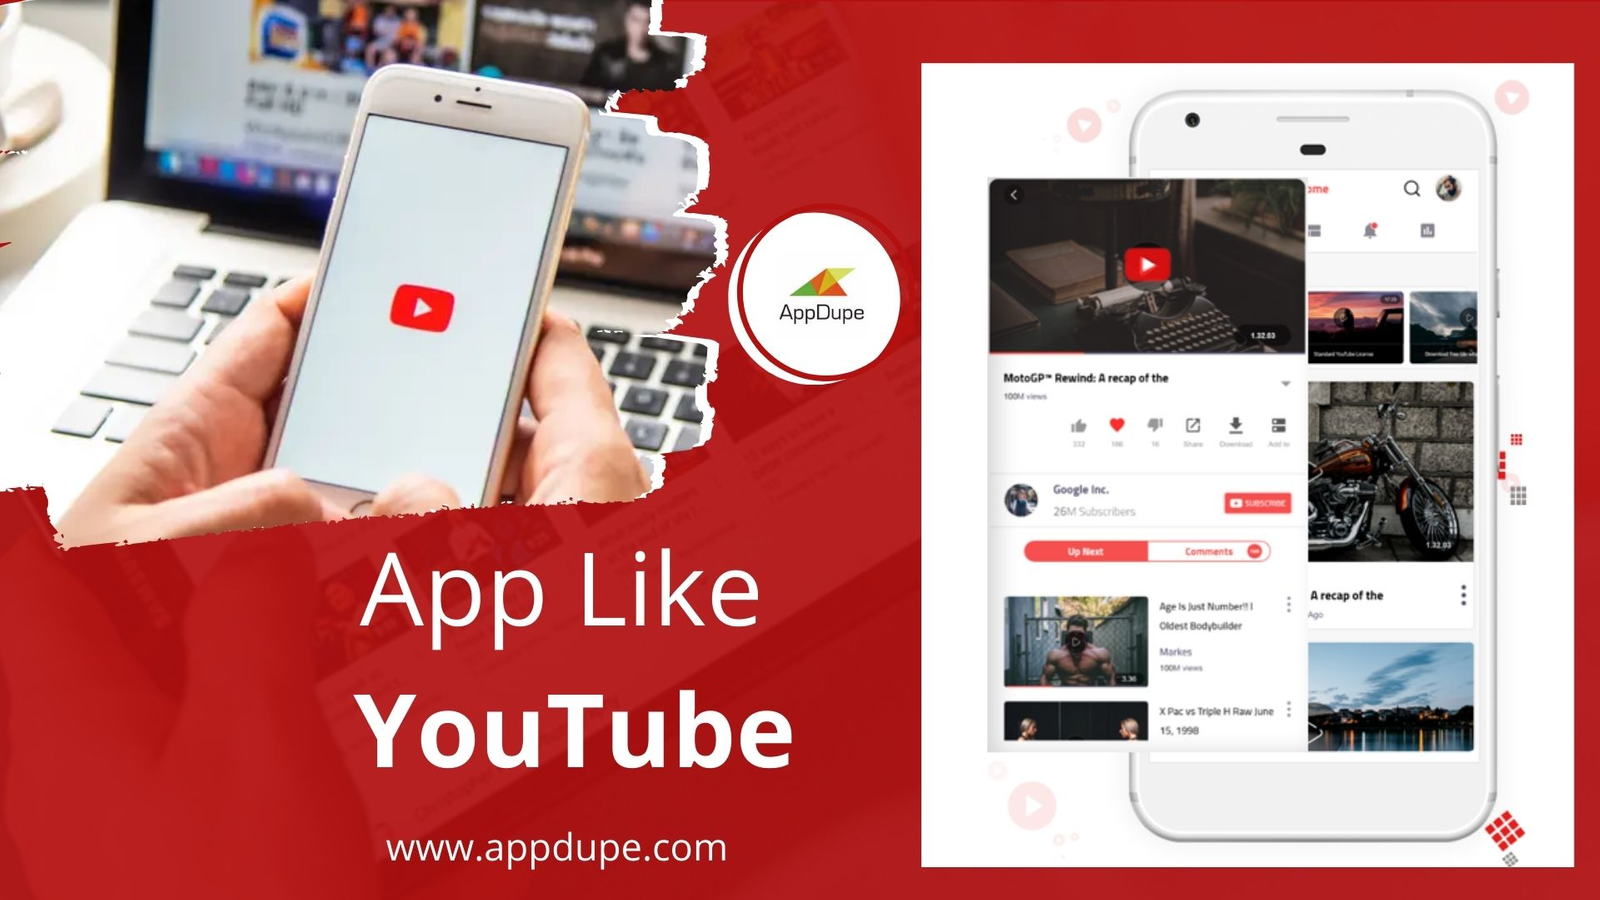 Must-have features of Youtube clone app